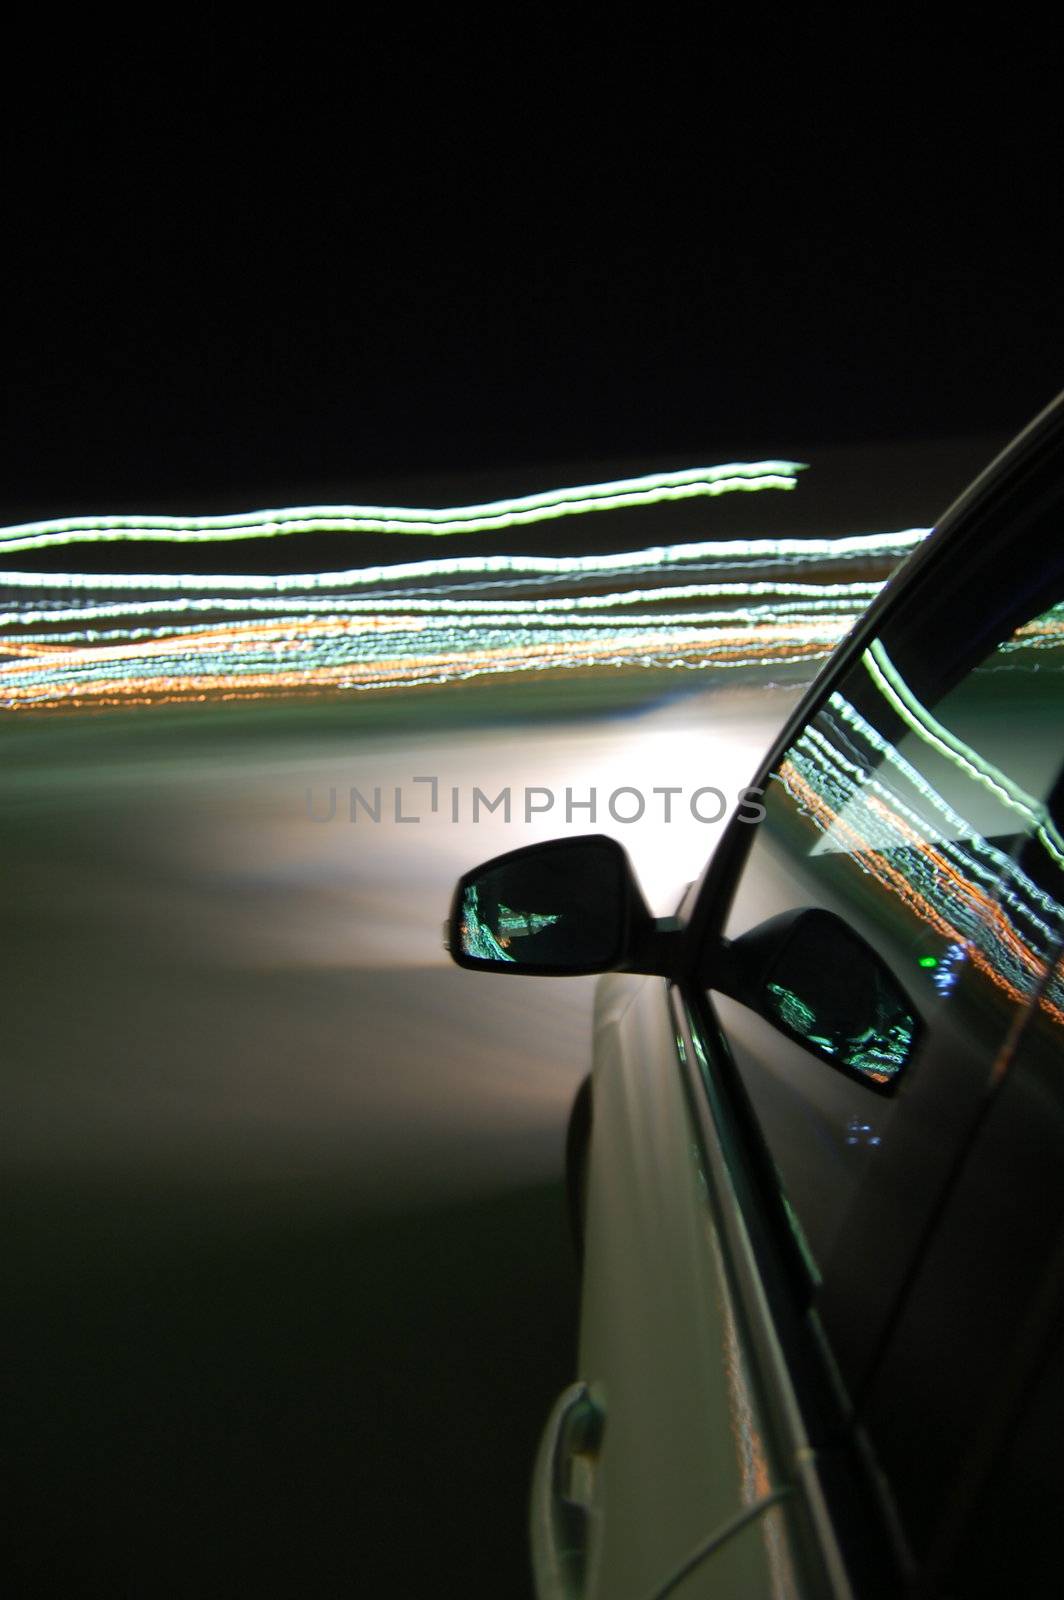 night drive with car in motion through the city shows the speed